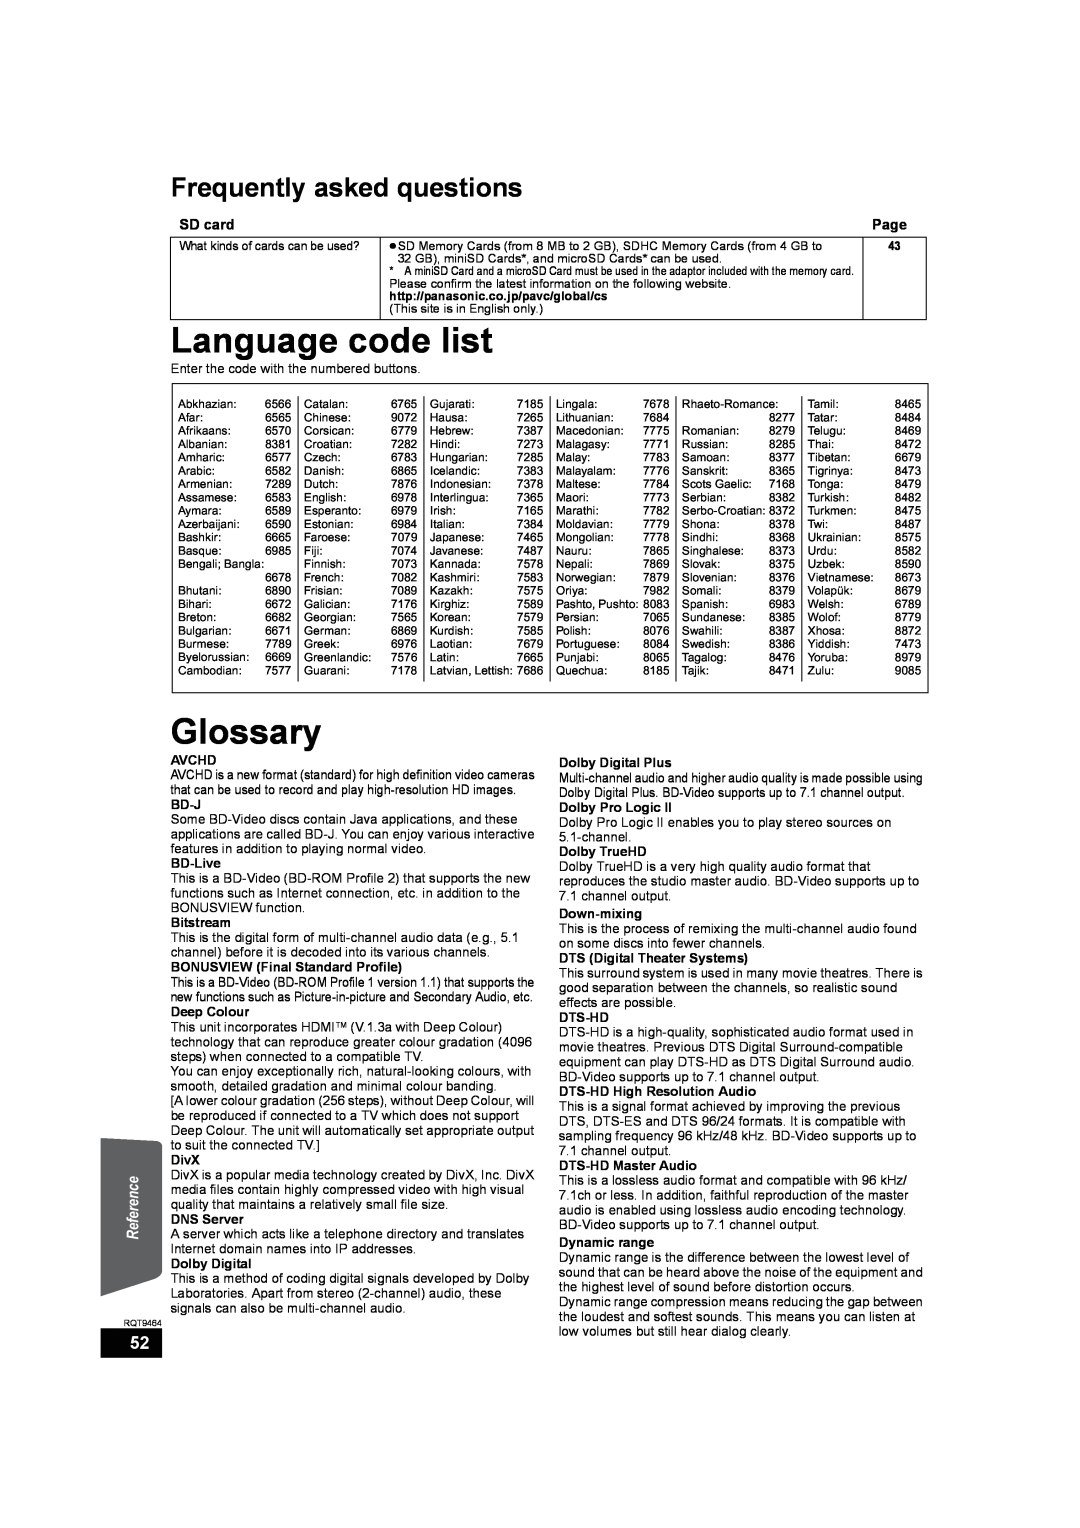 Panasonic SC-BTX70 manual Language code list, Glossary, Frequently asked questions, Reference 